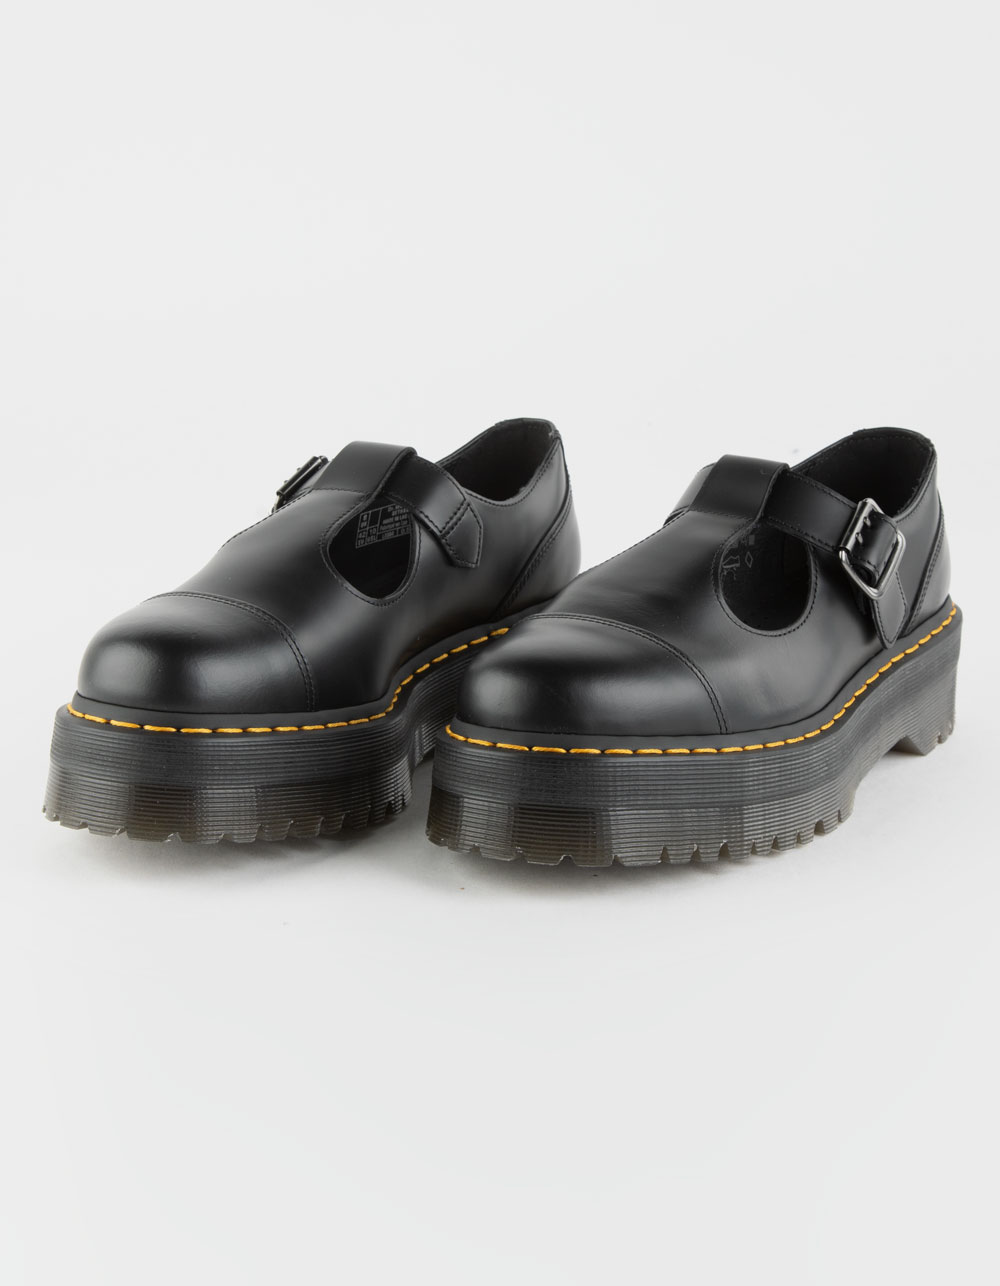 DR. MARTENS Bethan Womens Smooth Polished Leather Platform Mary Jane Shoes